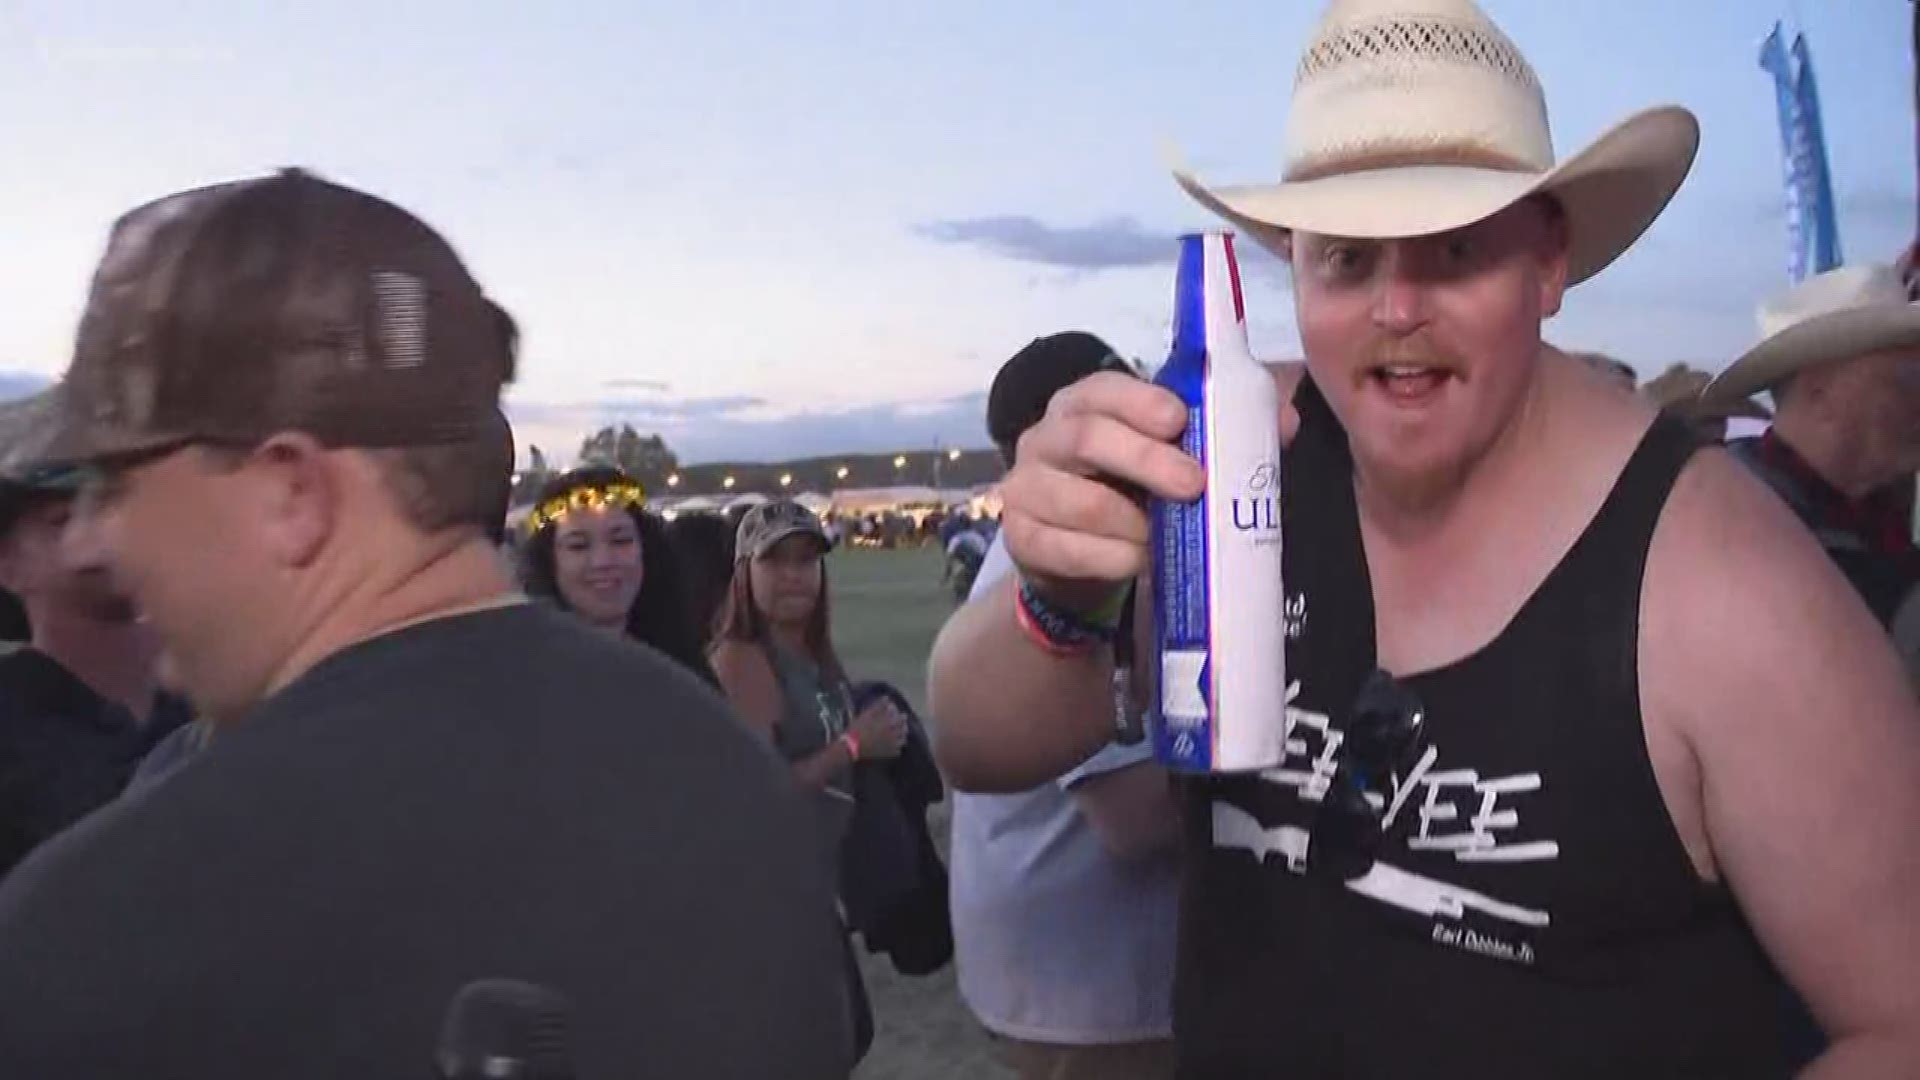 Team 12's Ryan Cody takes us inside the annual country music festival with a look at tips to survive, food options and fan reaction.